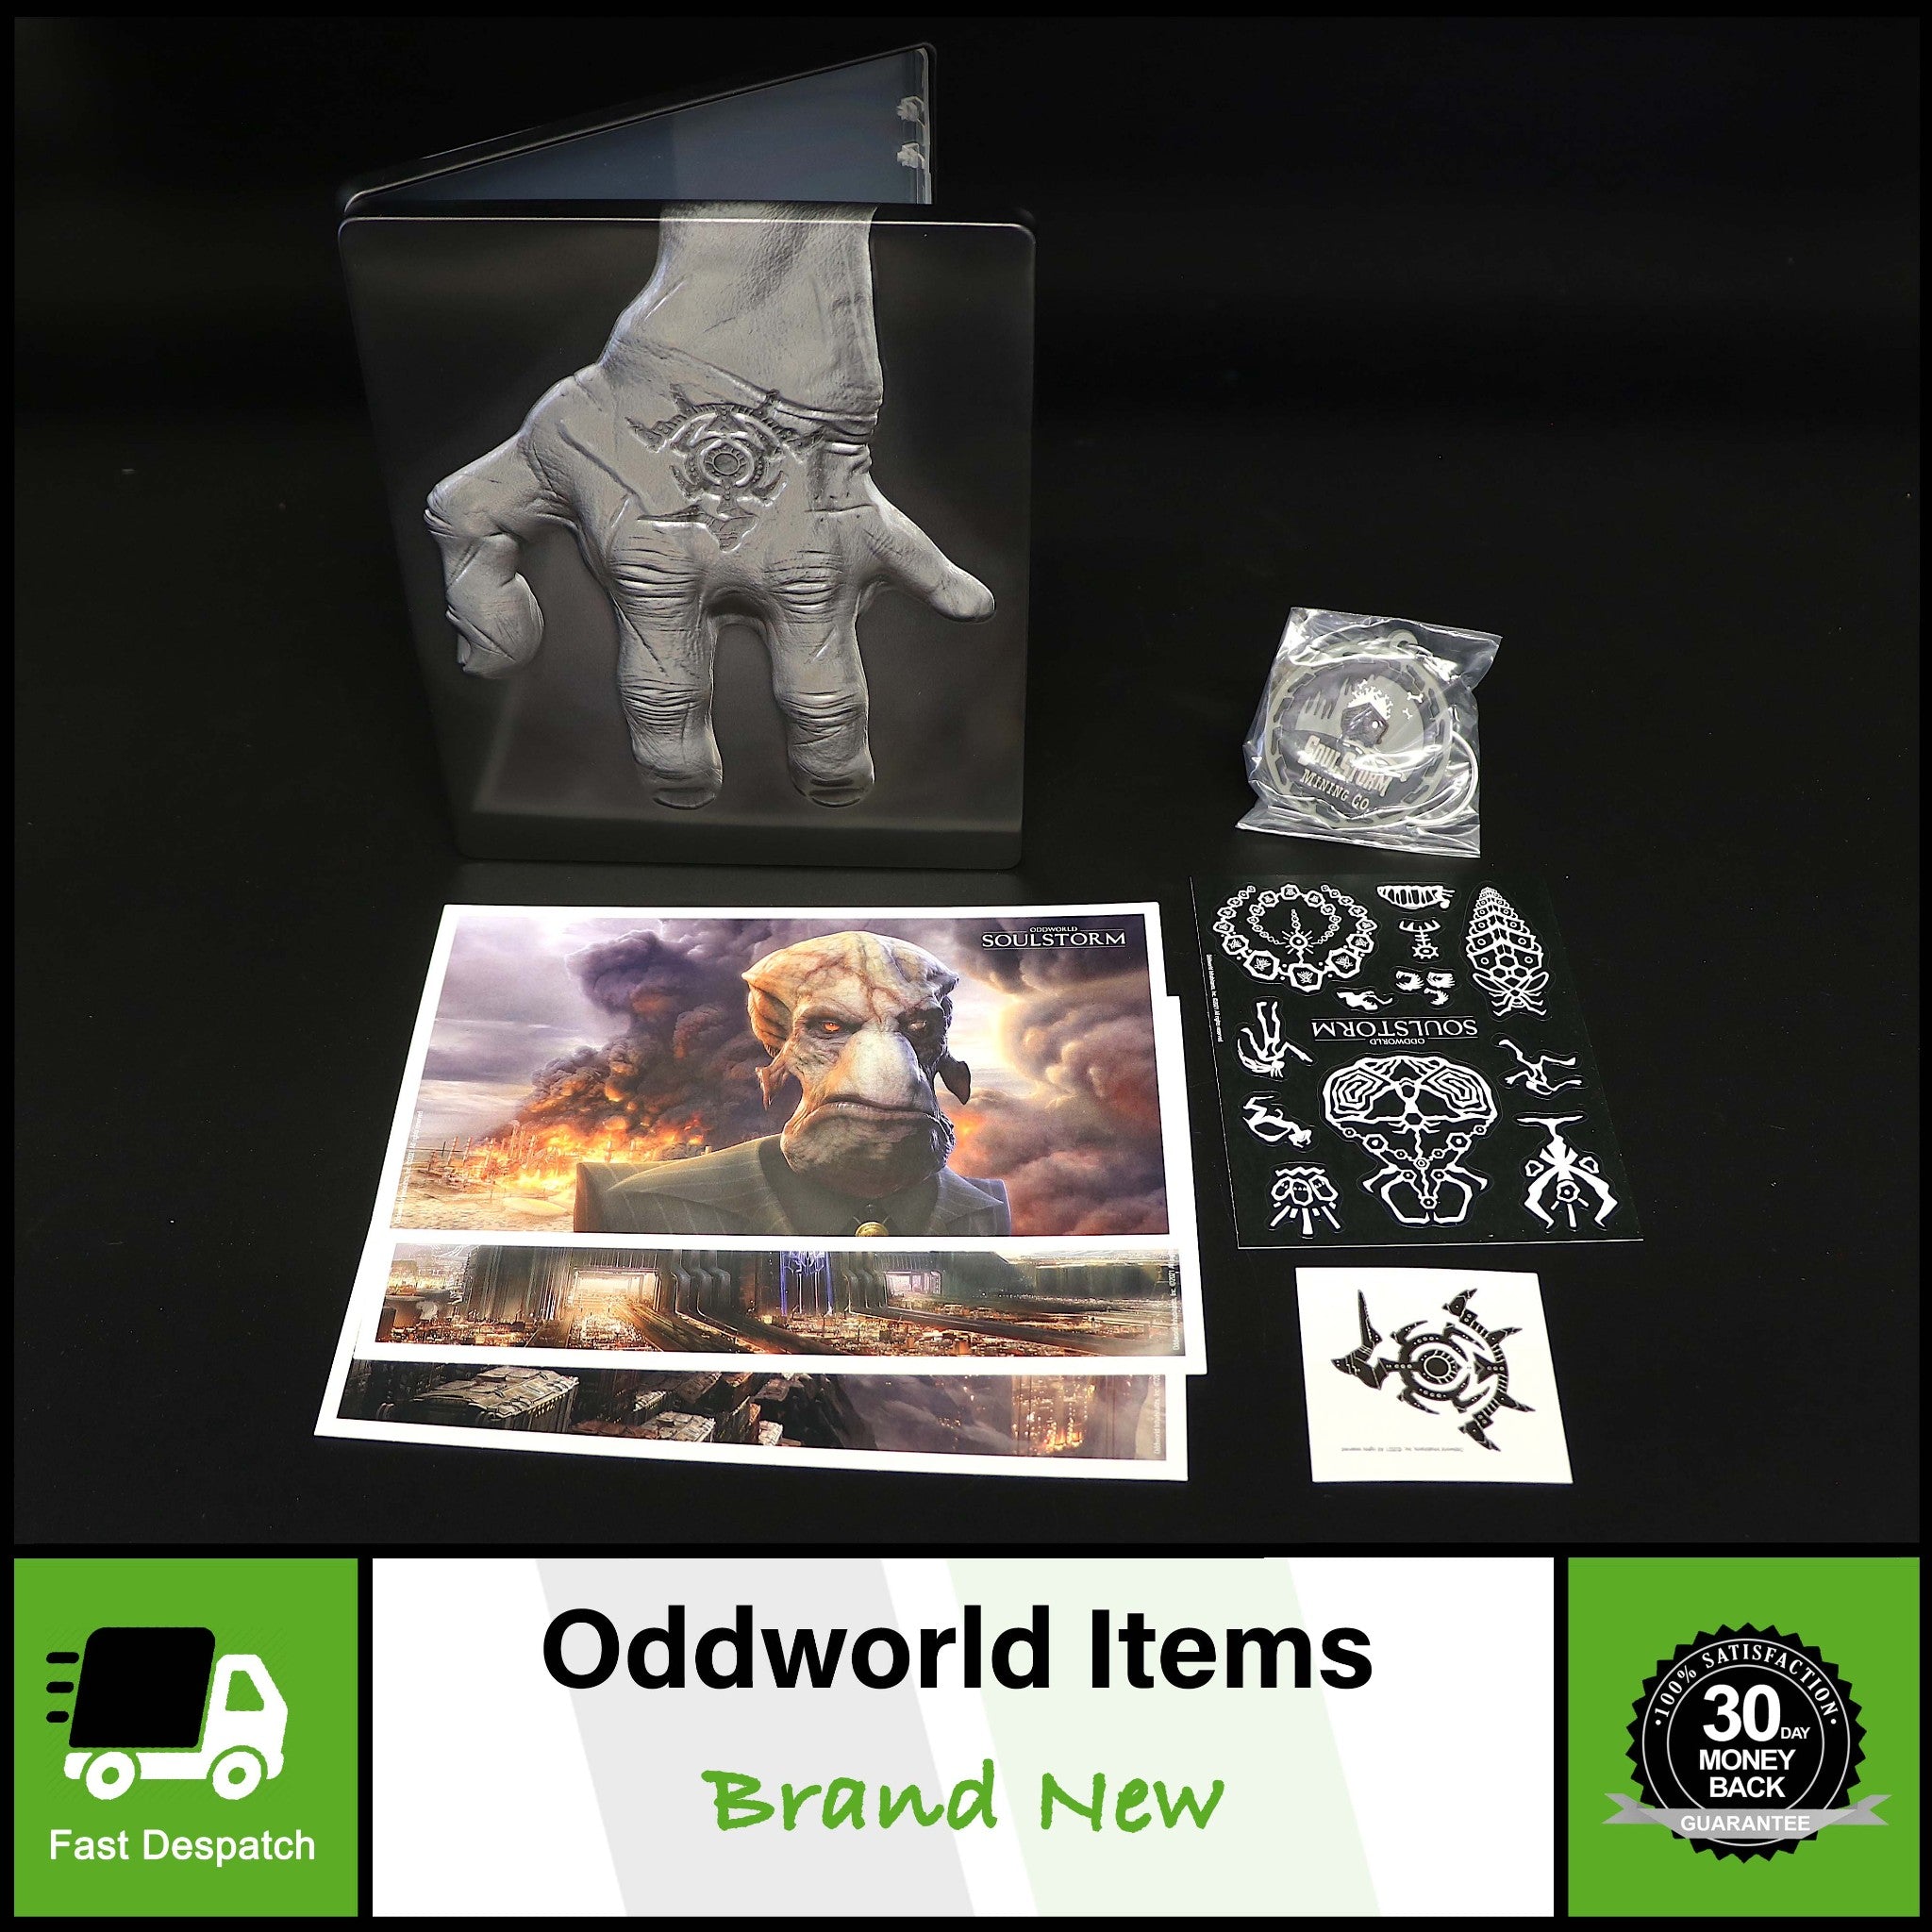 Soulstorm Oddworld Steelbook Keychain Postcard From Collectors Edition PS4 Game